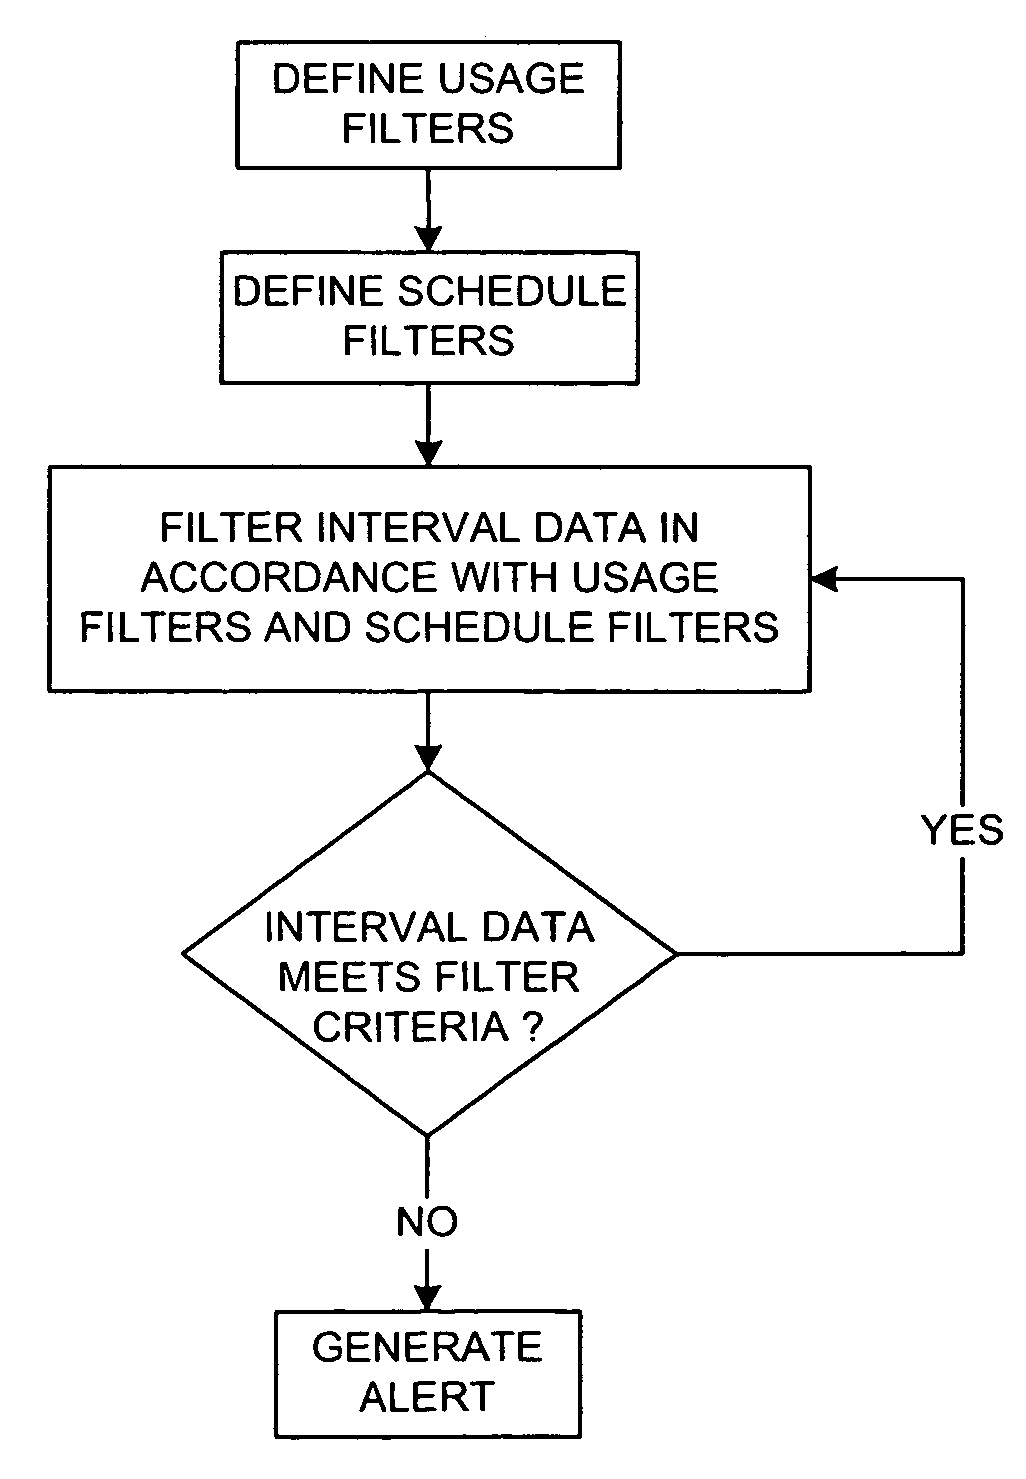 Fuzzy time-of-use metering and consumption monitoring using load profile data from relative time transmit-only devices